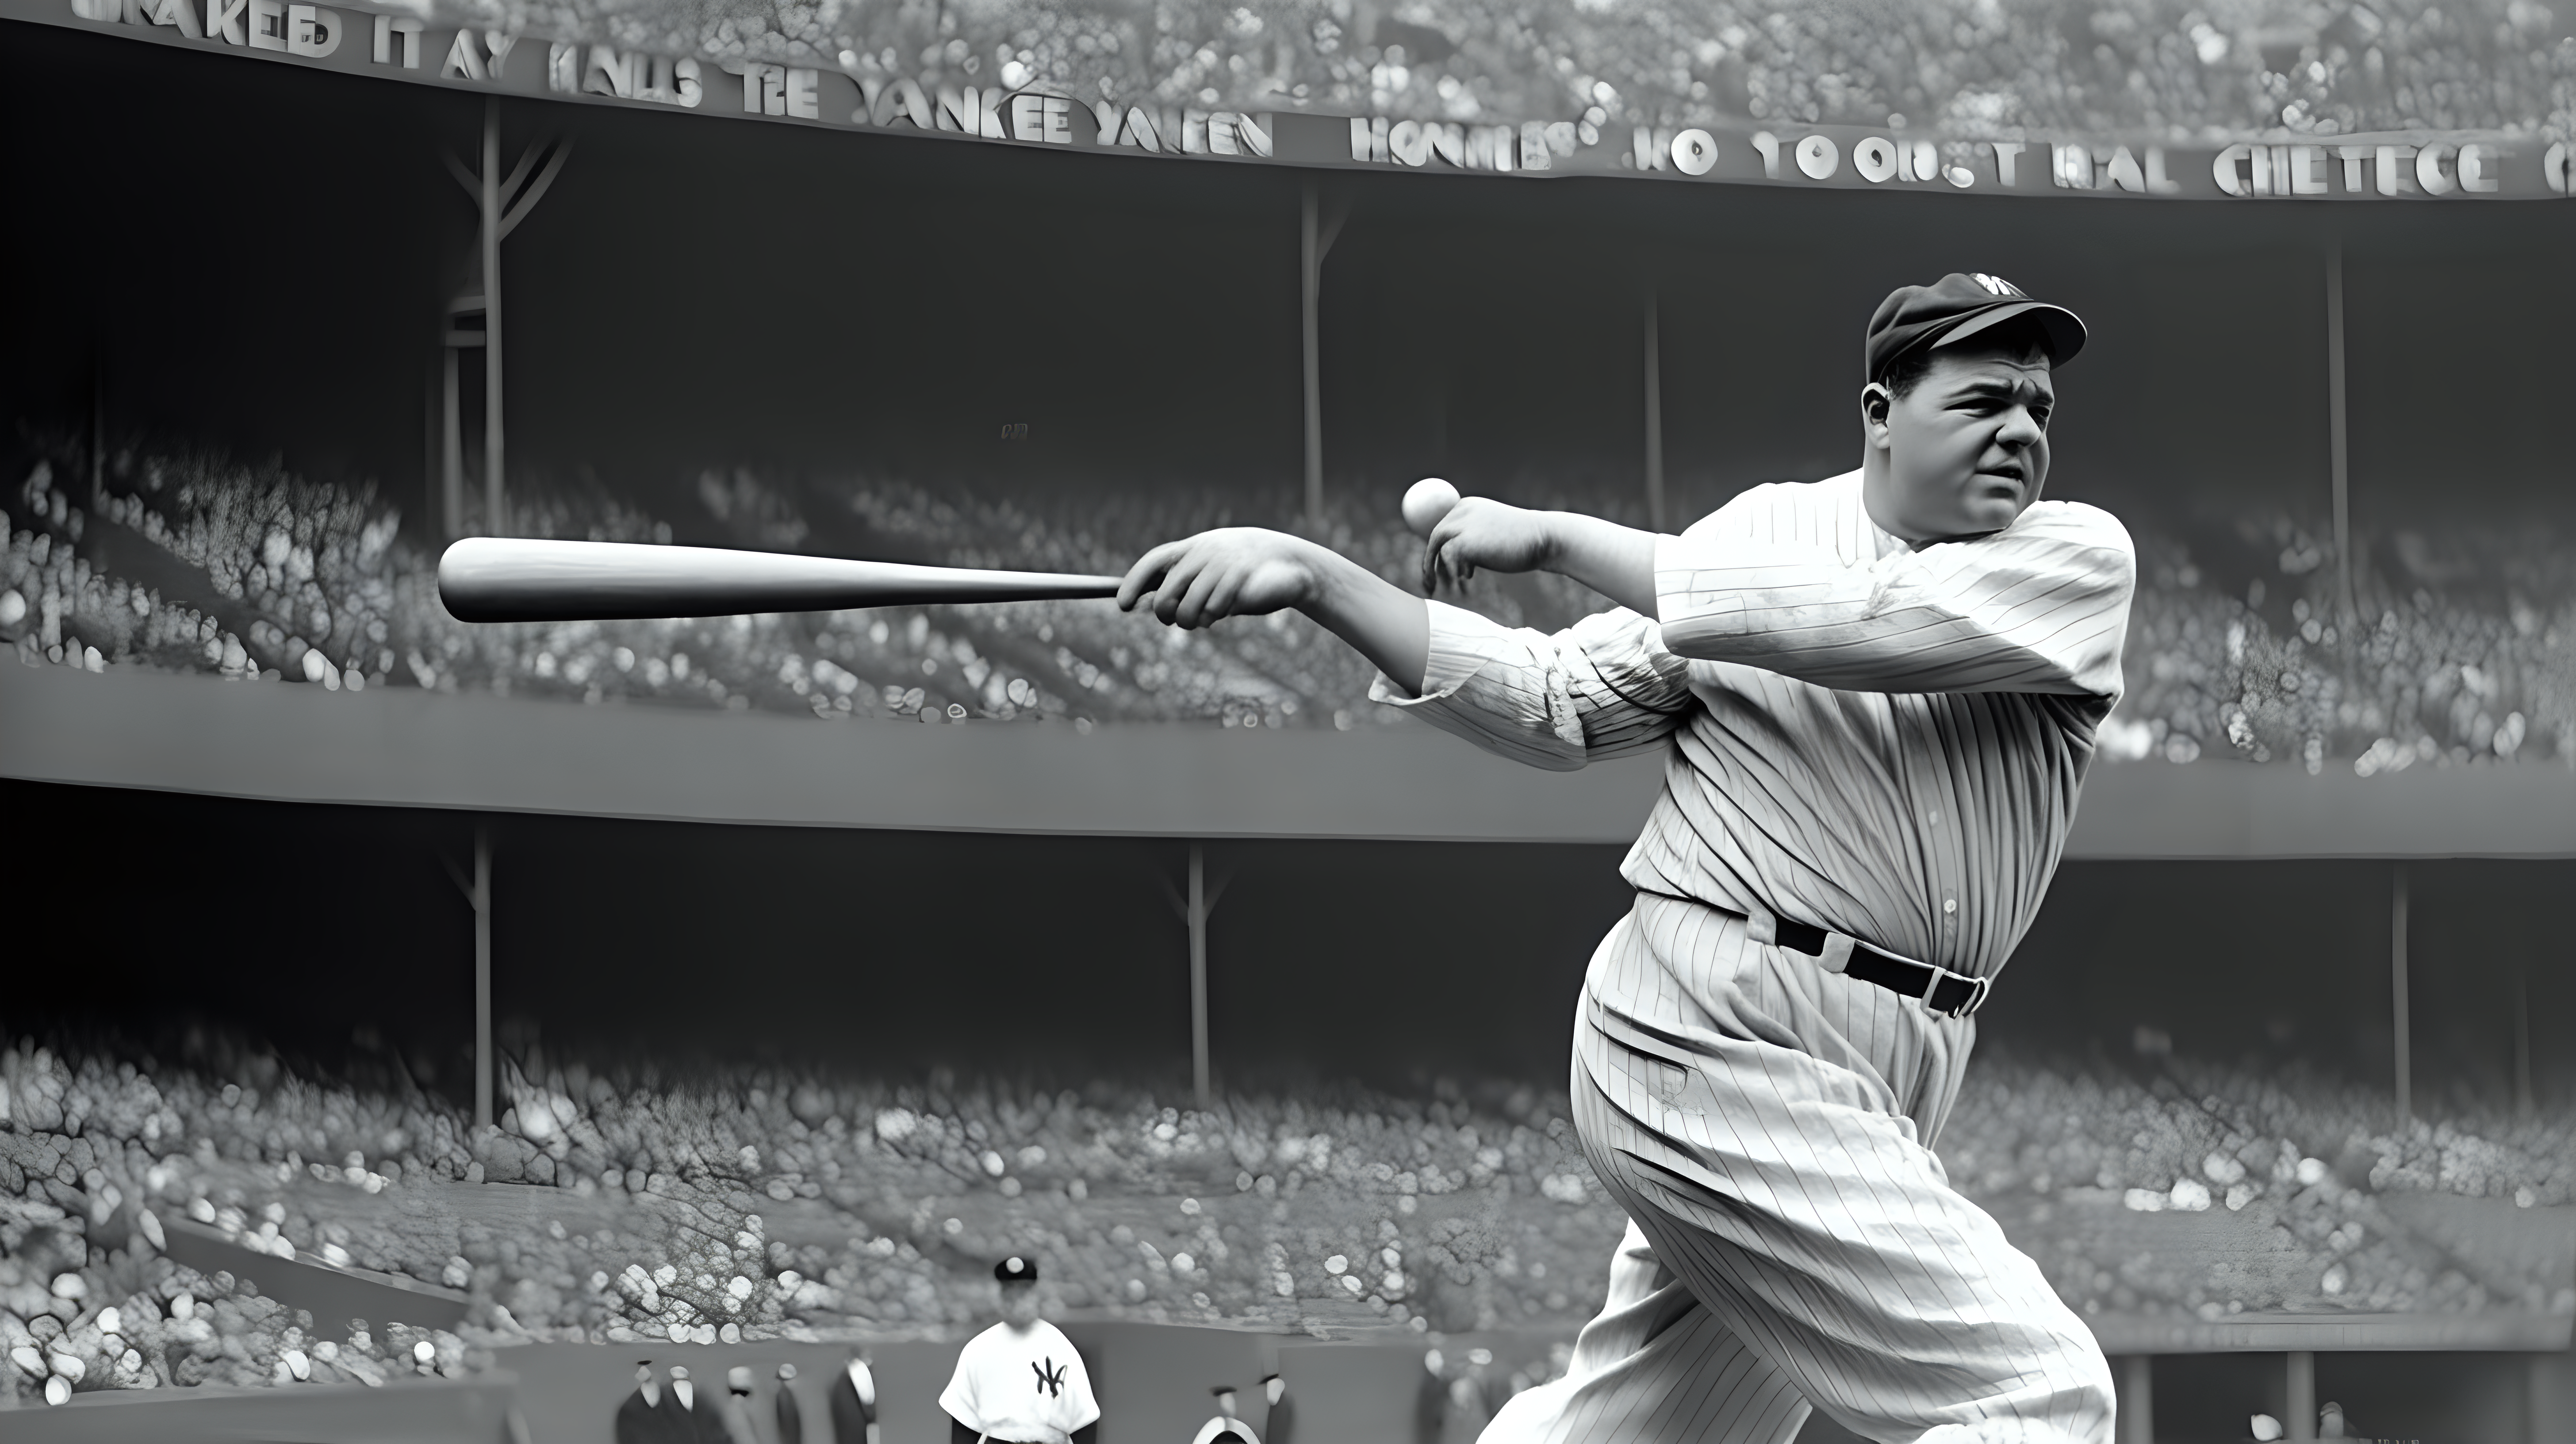 Babe Ruth hitting a ball out of Yankee statidum